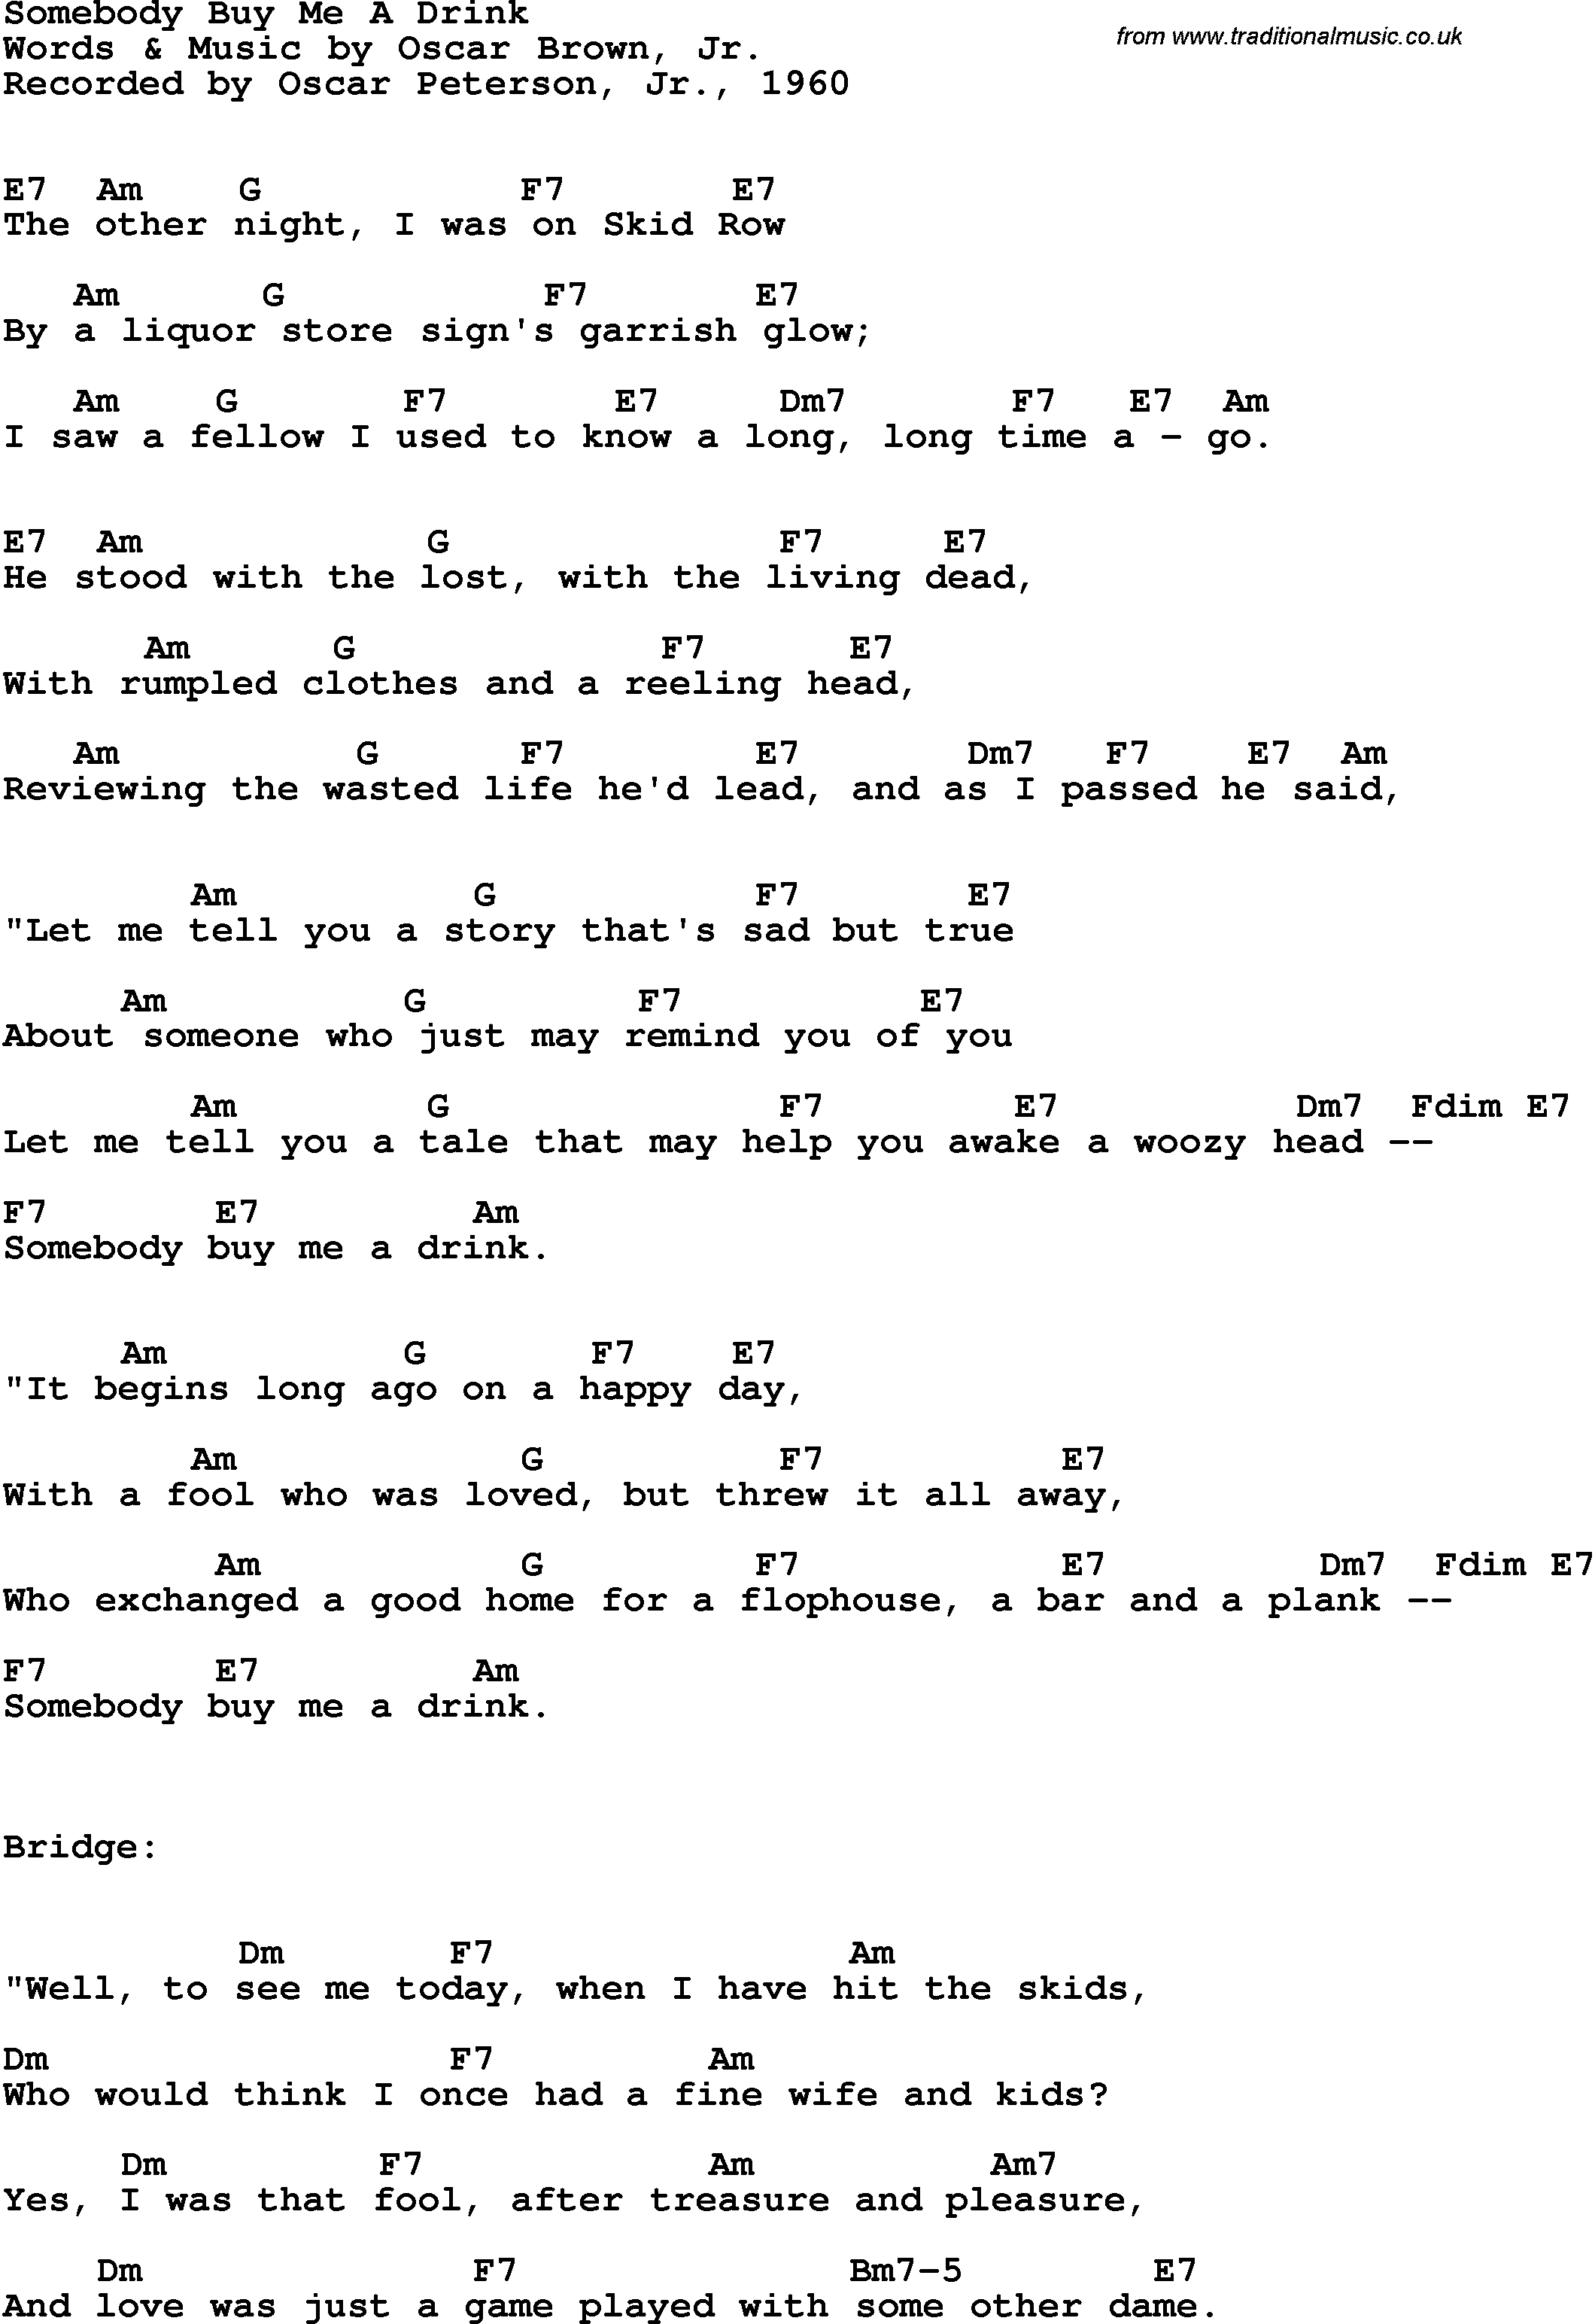 Song Lyrics with guitar chords for Somebody Buy Me A Drink - Oscar Peterson, Jr